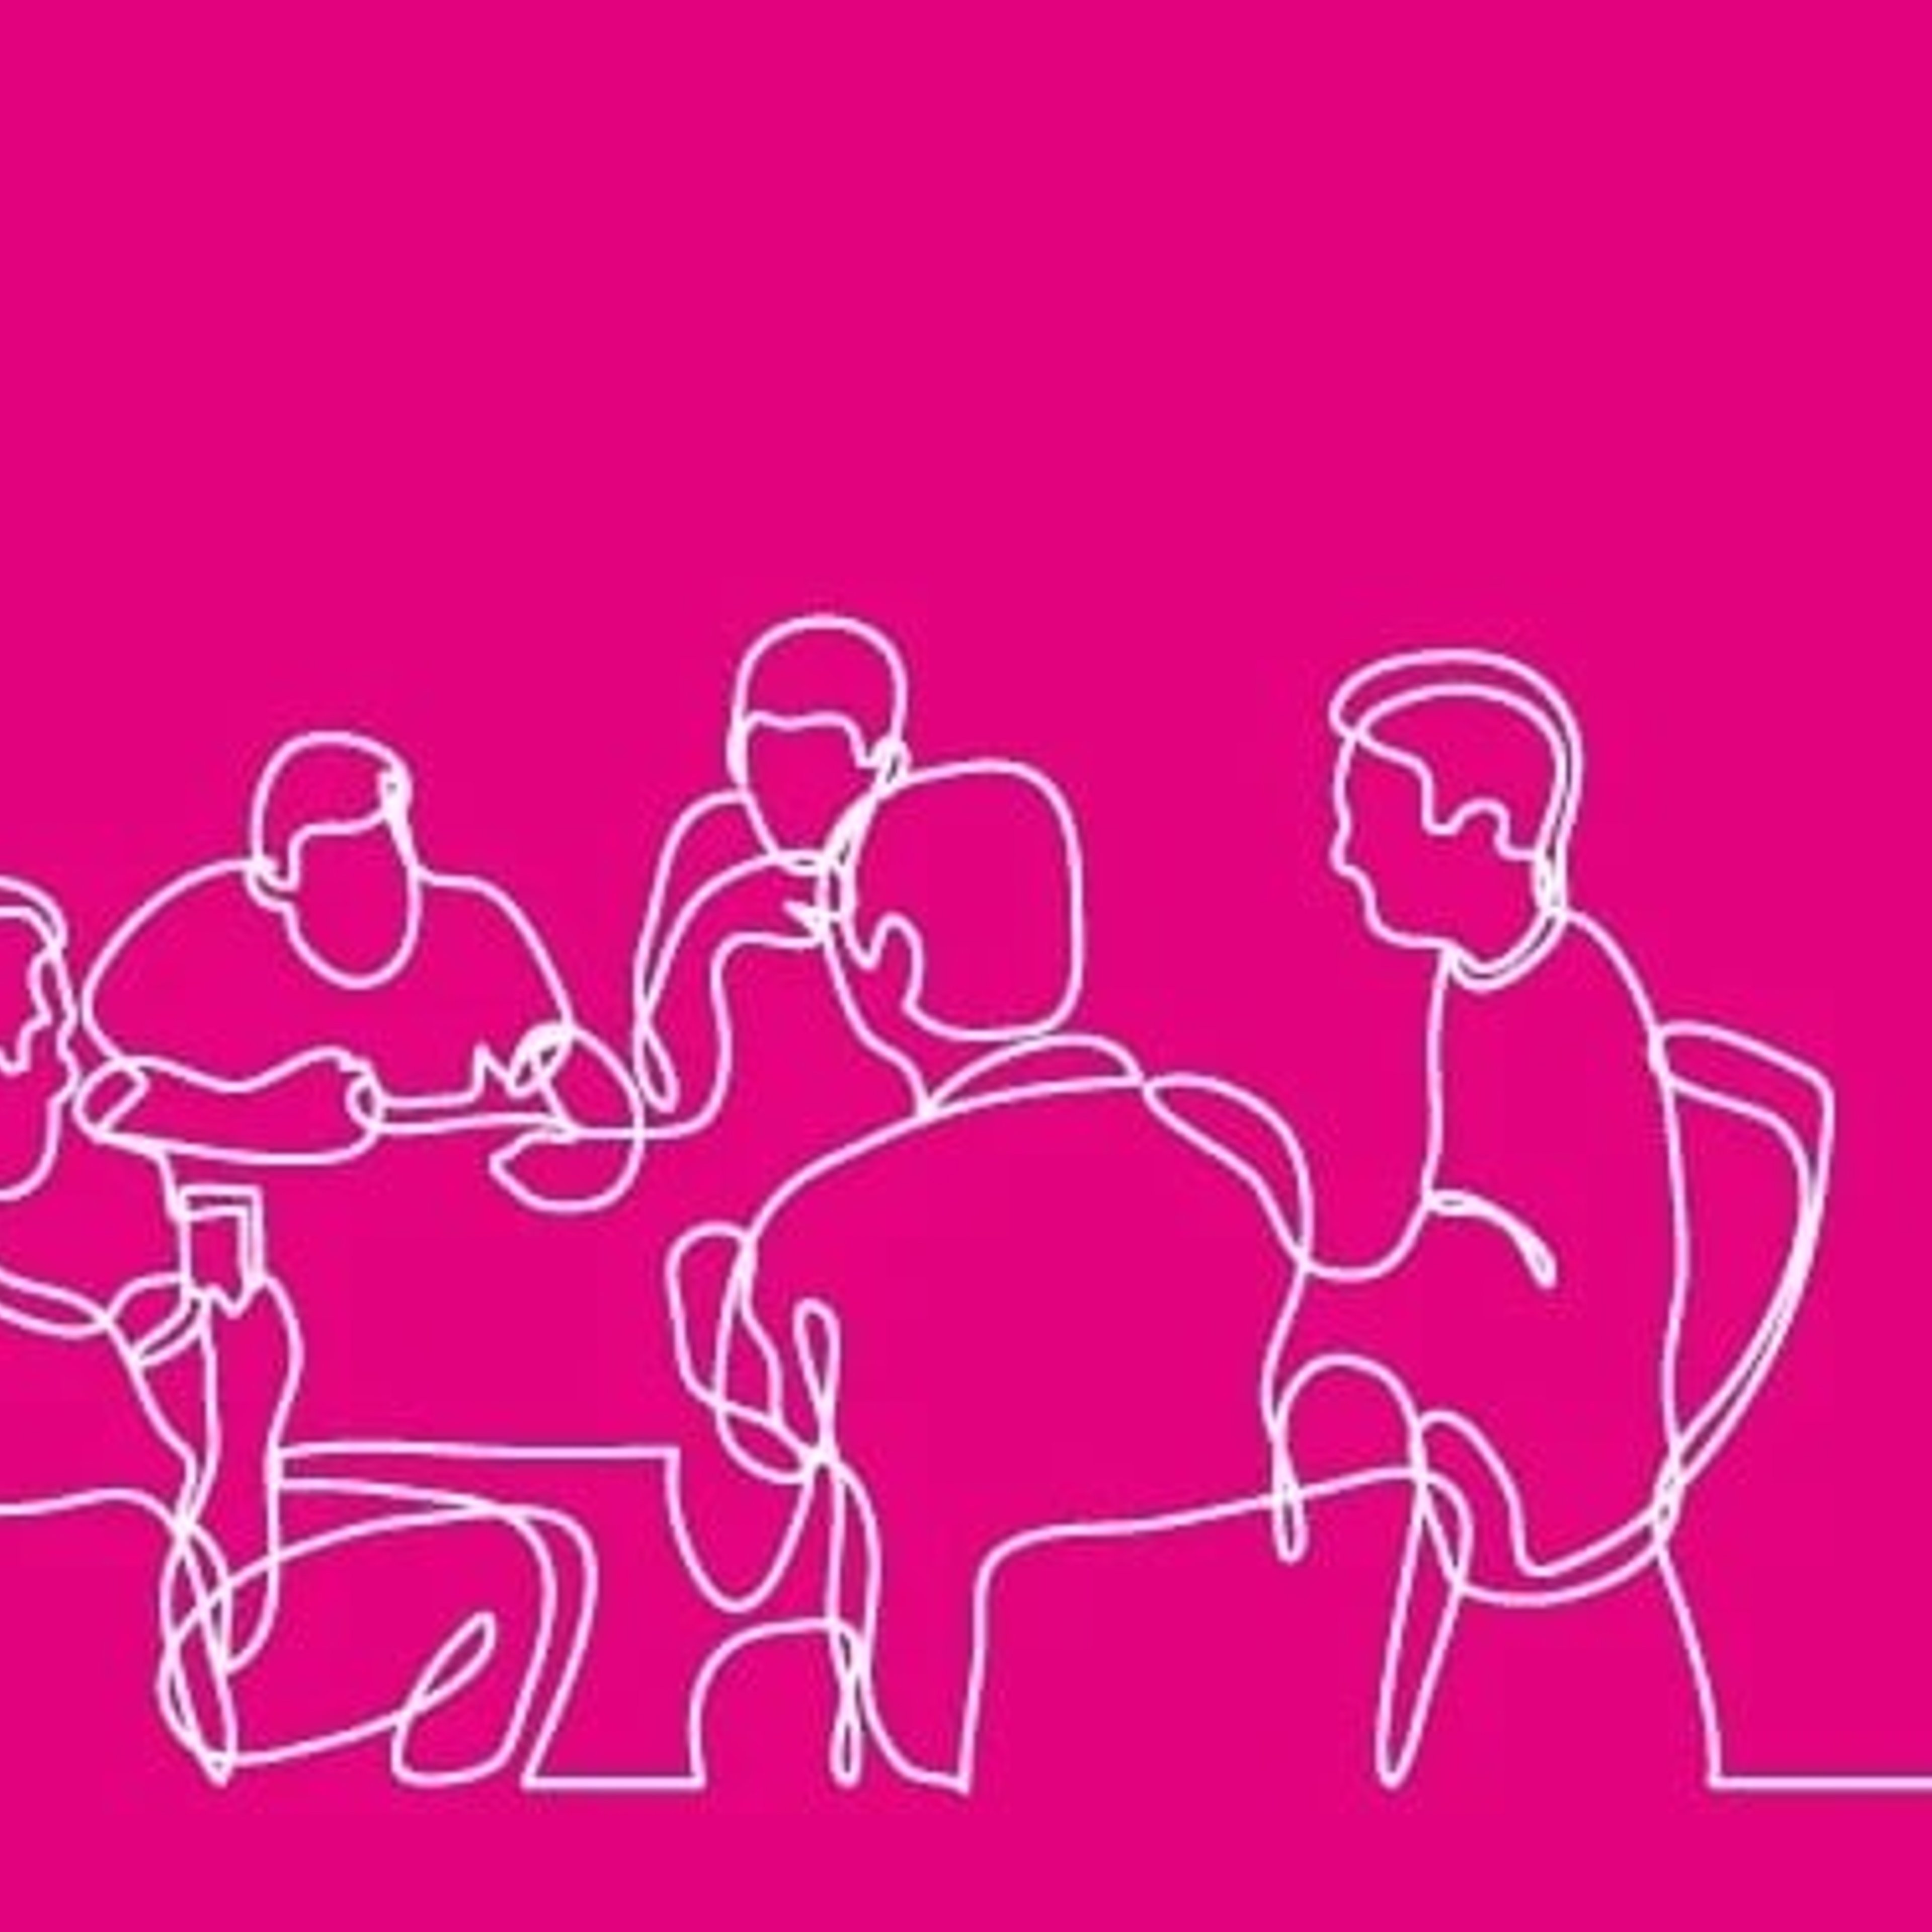 Sketch of people sitting round a meeting table